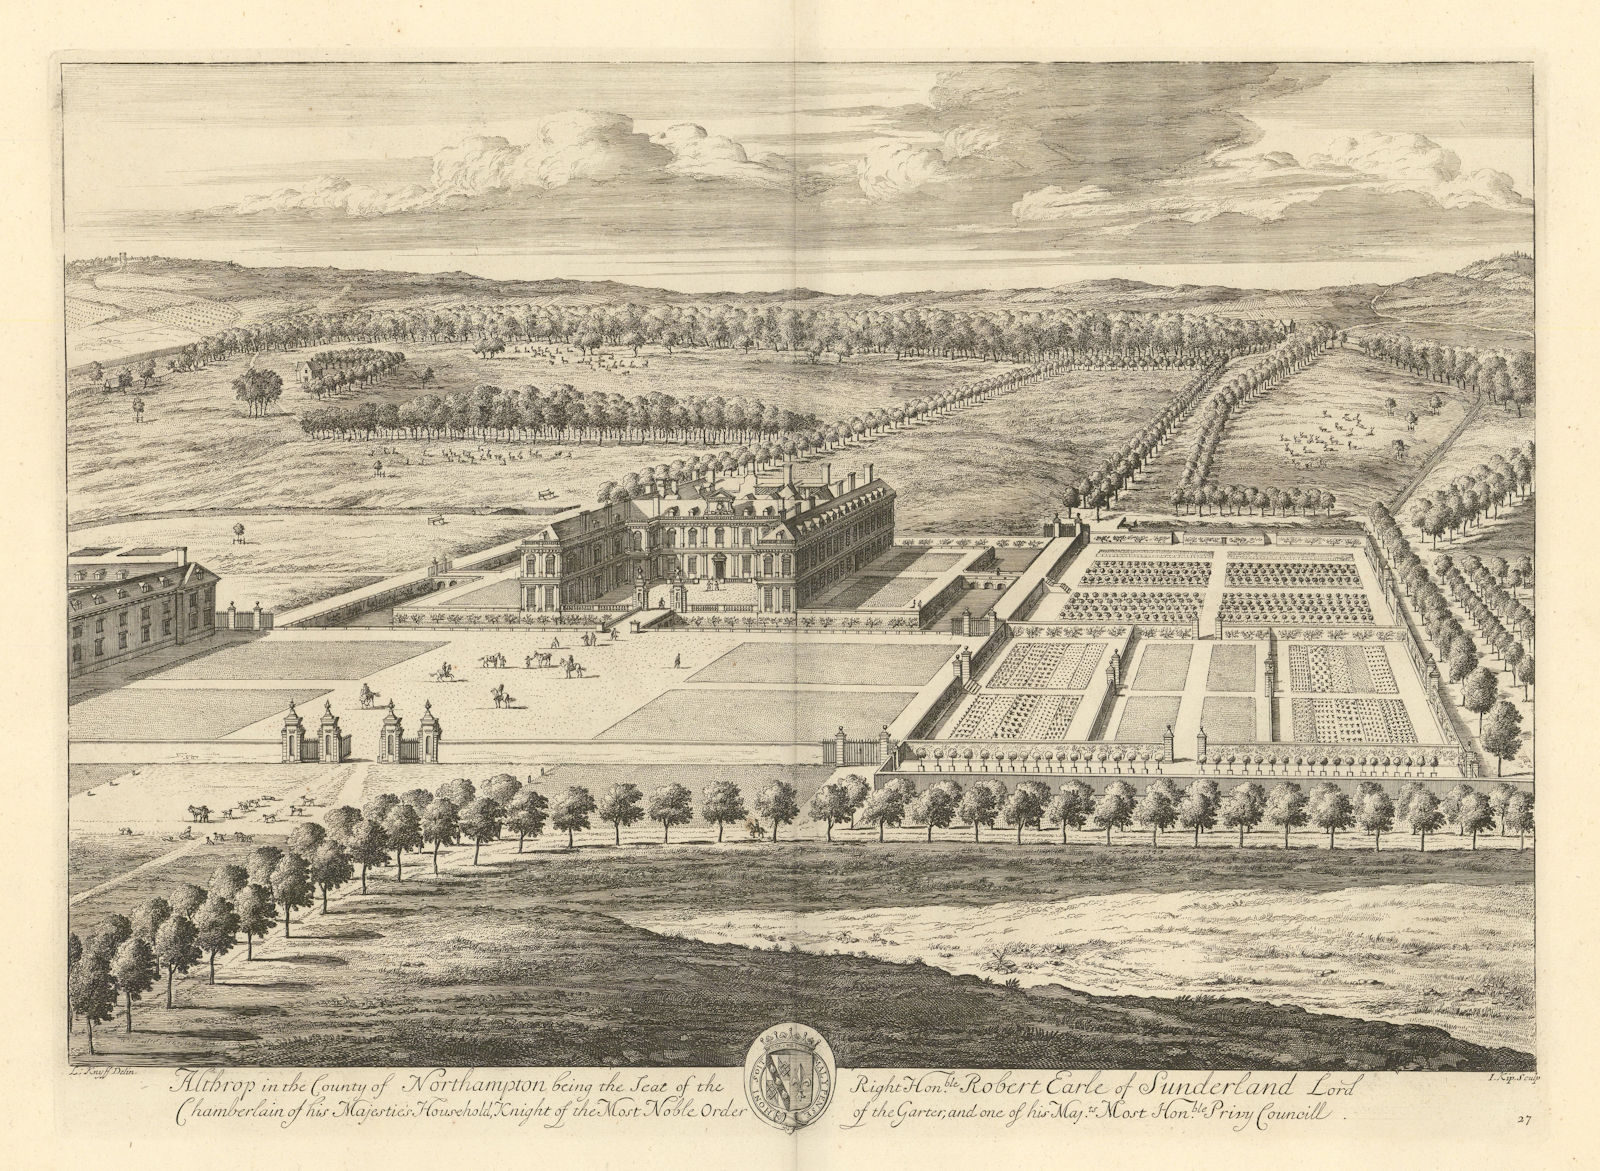 Althorp House & Estate by Kip/Knyff. "Althrop in the County of Northampton" 1709